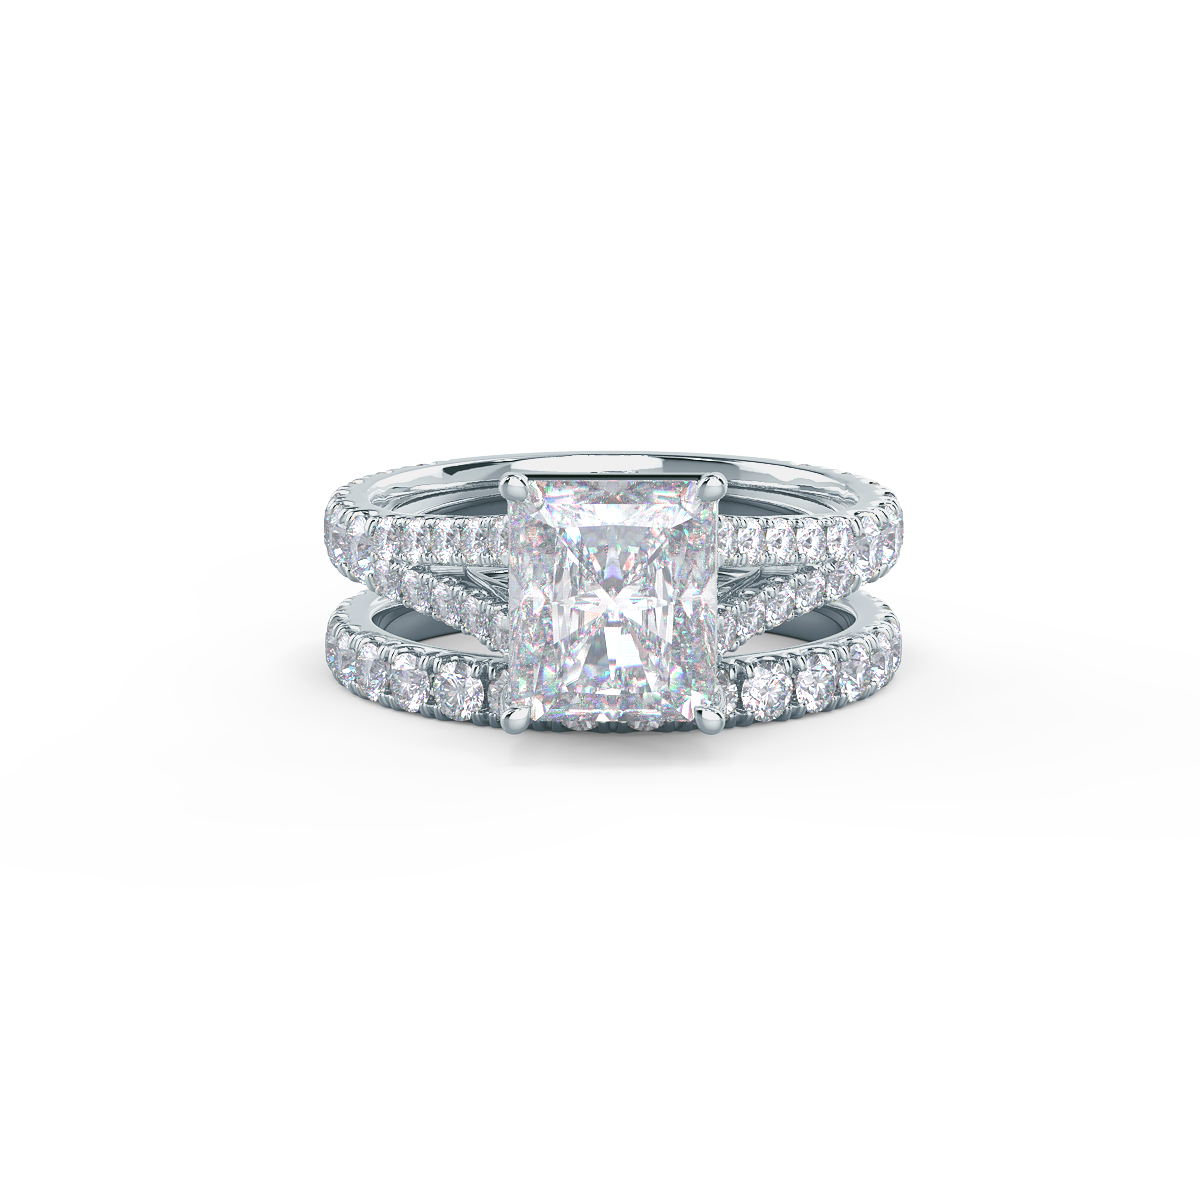   This setting pairs with a variety of wedding band styles.     View Wedding Band Details   